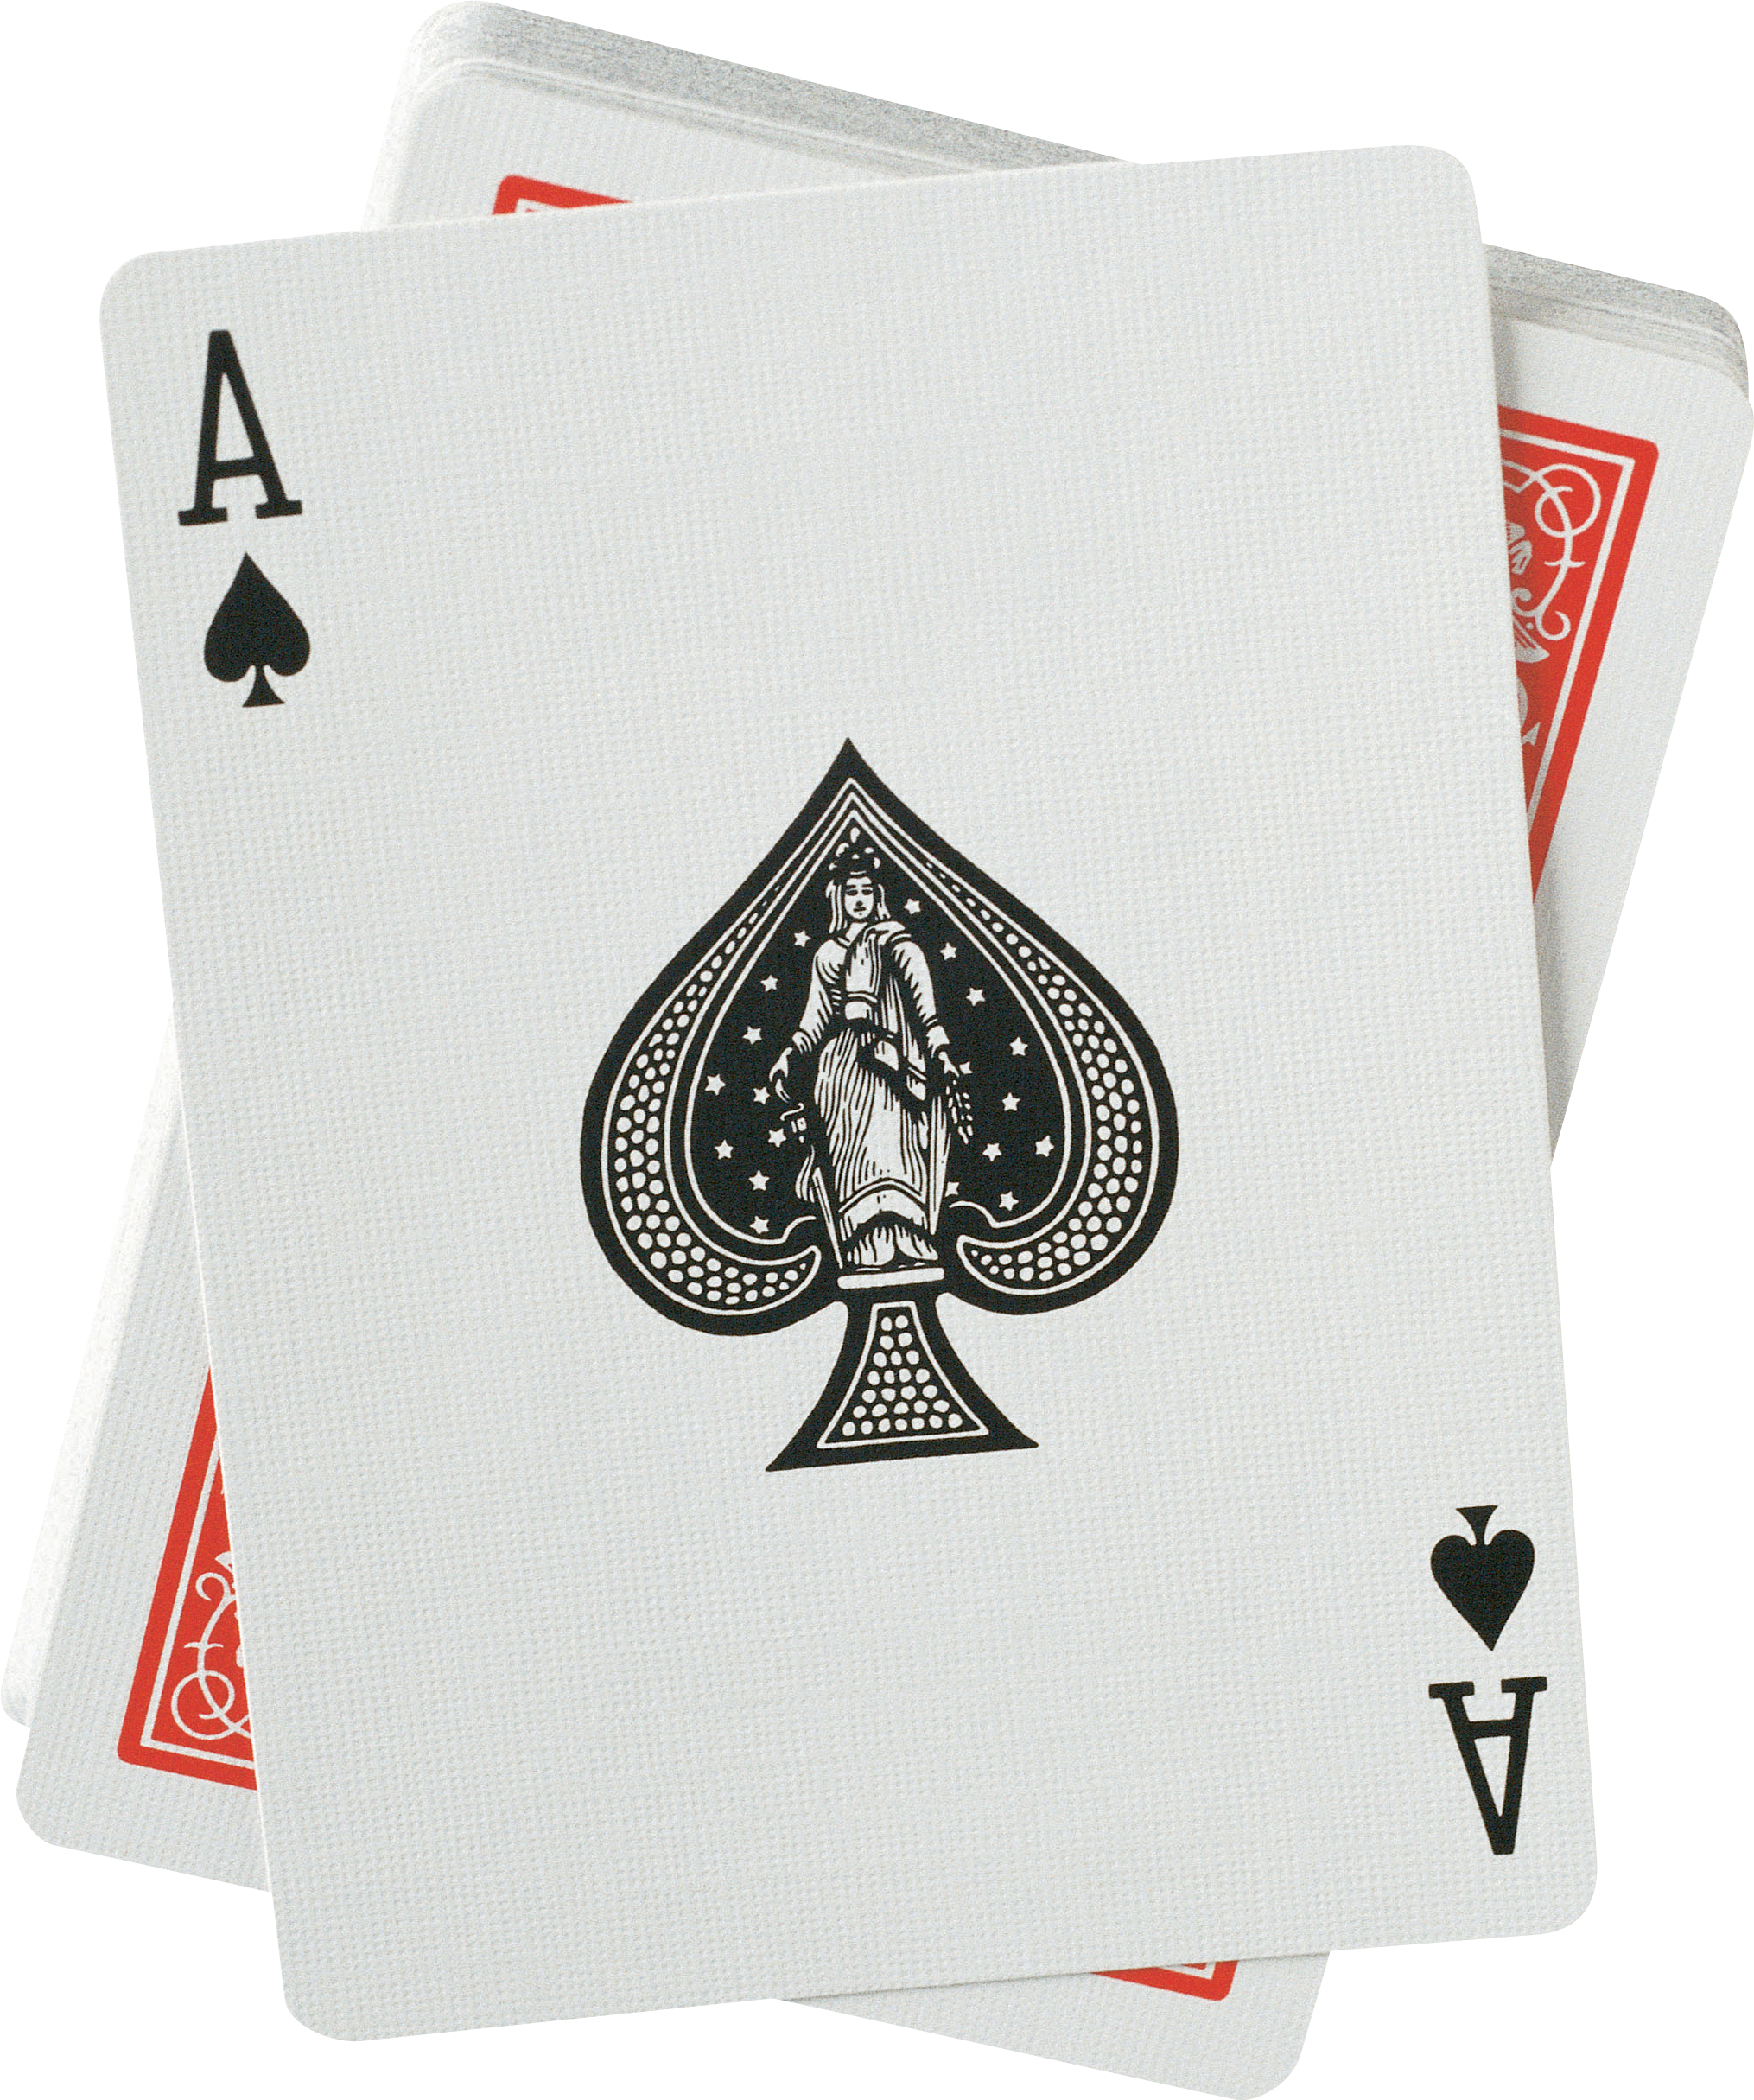 United Spades Ace Of Company States Cards PNG Image